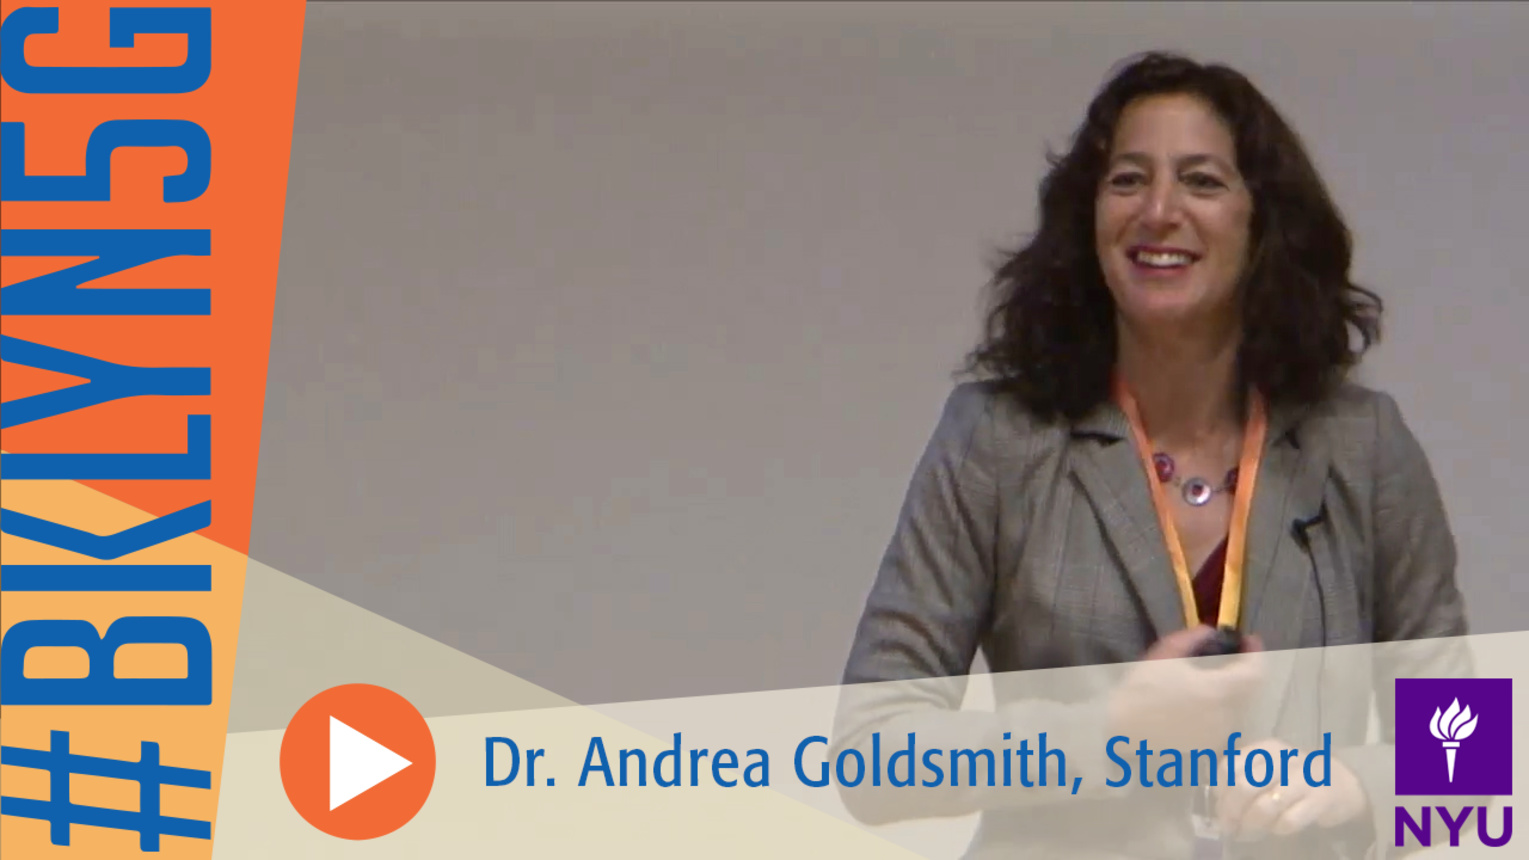 The Brooklyn 5G Summit: Dr. Andrea Goldsmith of Stanford University